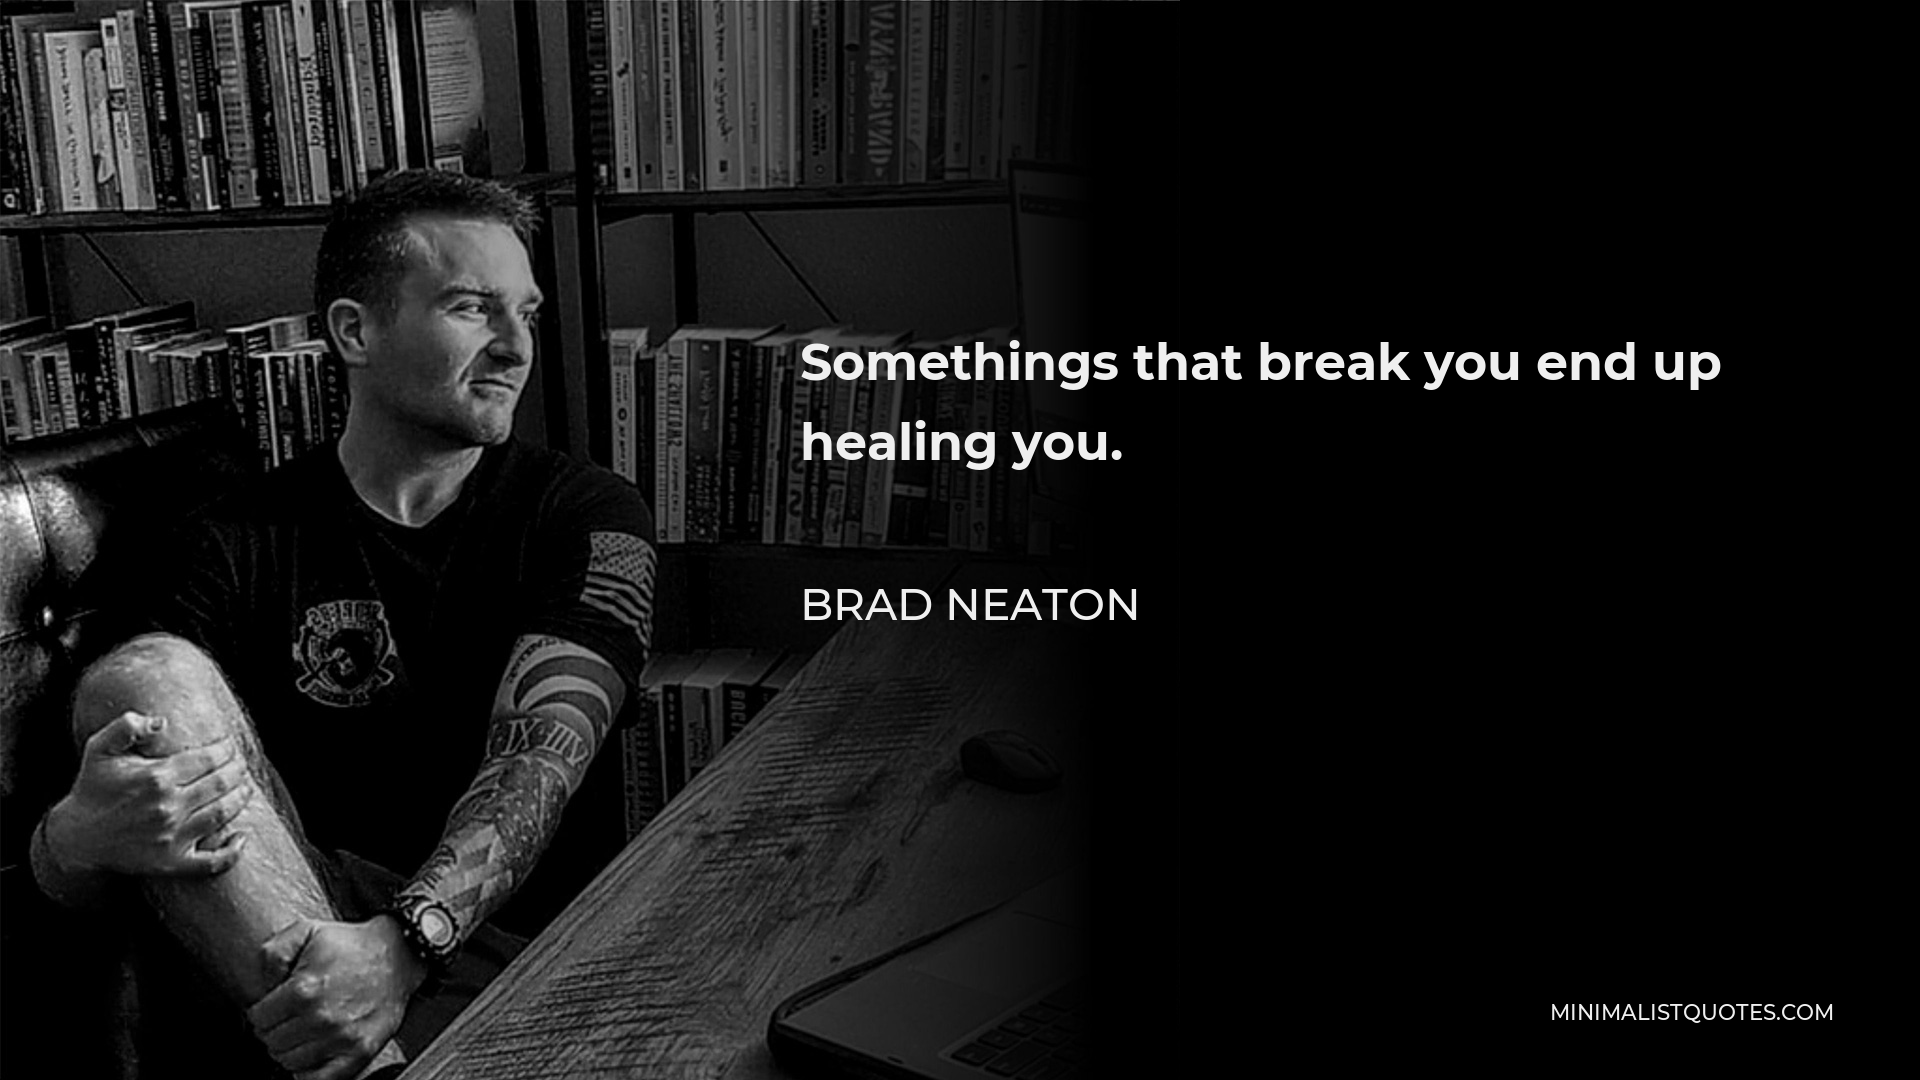 Brad Neaton Quote - Somethings that break you end up healing you.